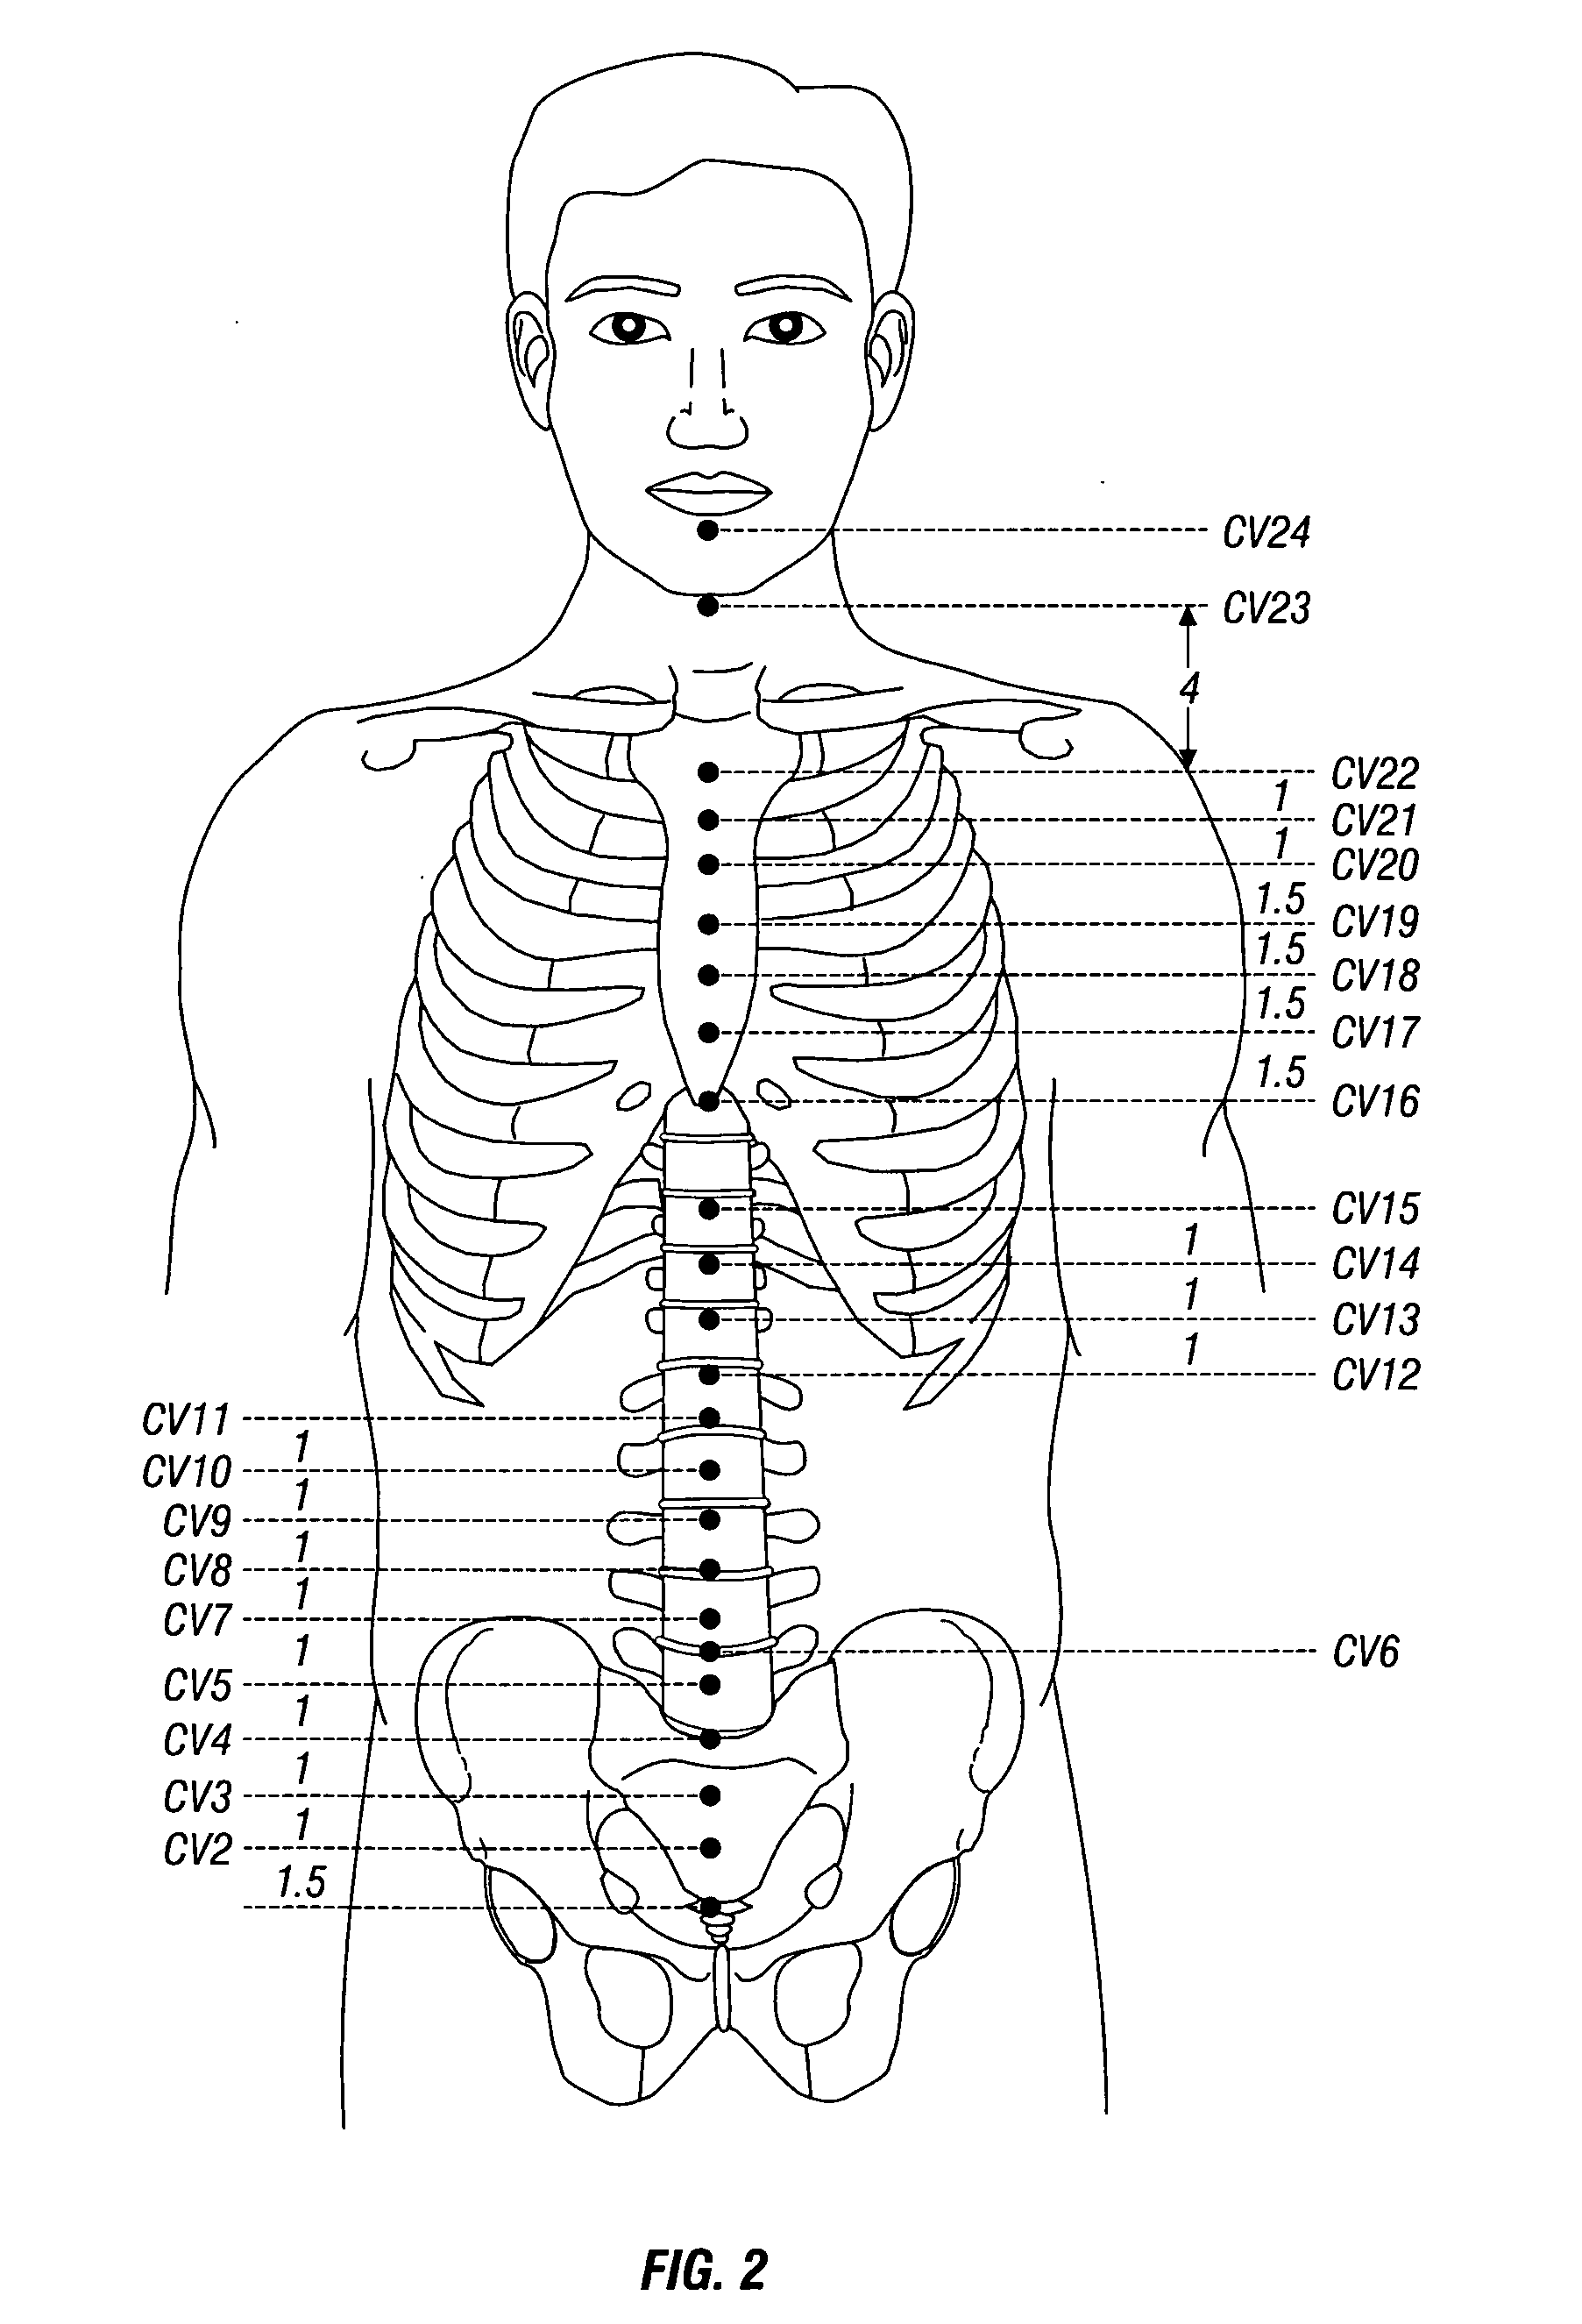 Method for energy-based stimulation of acupuncture meridians